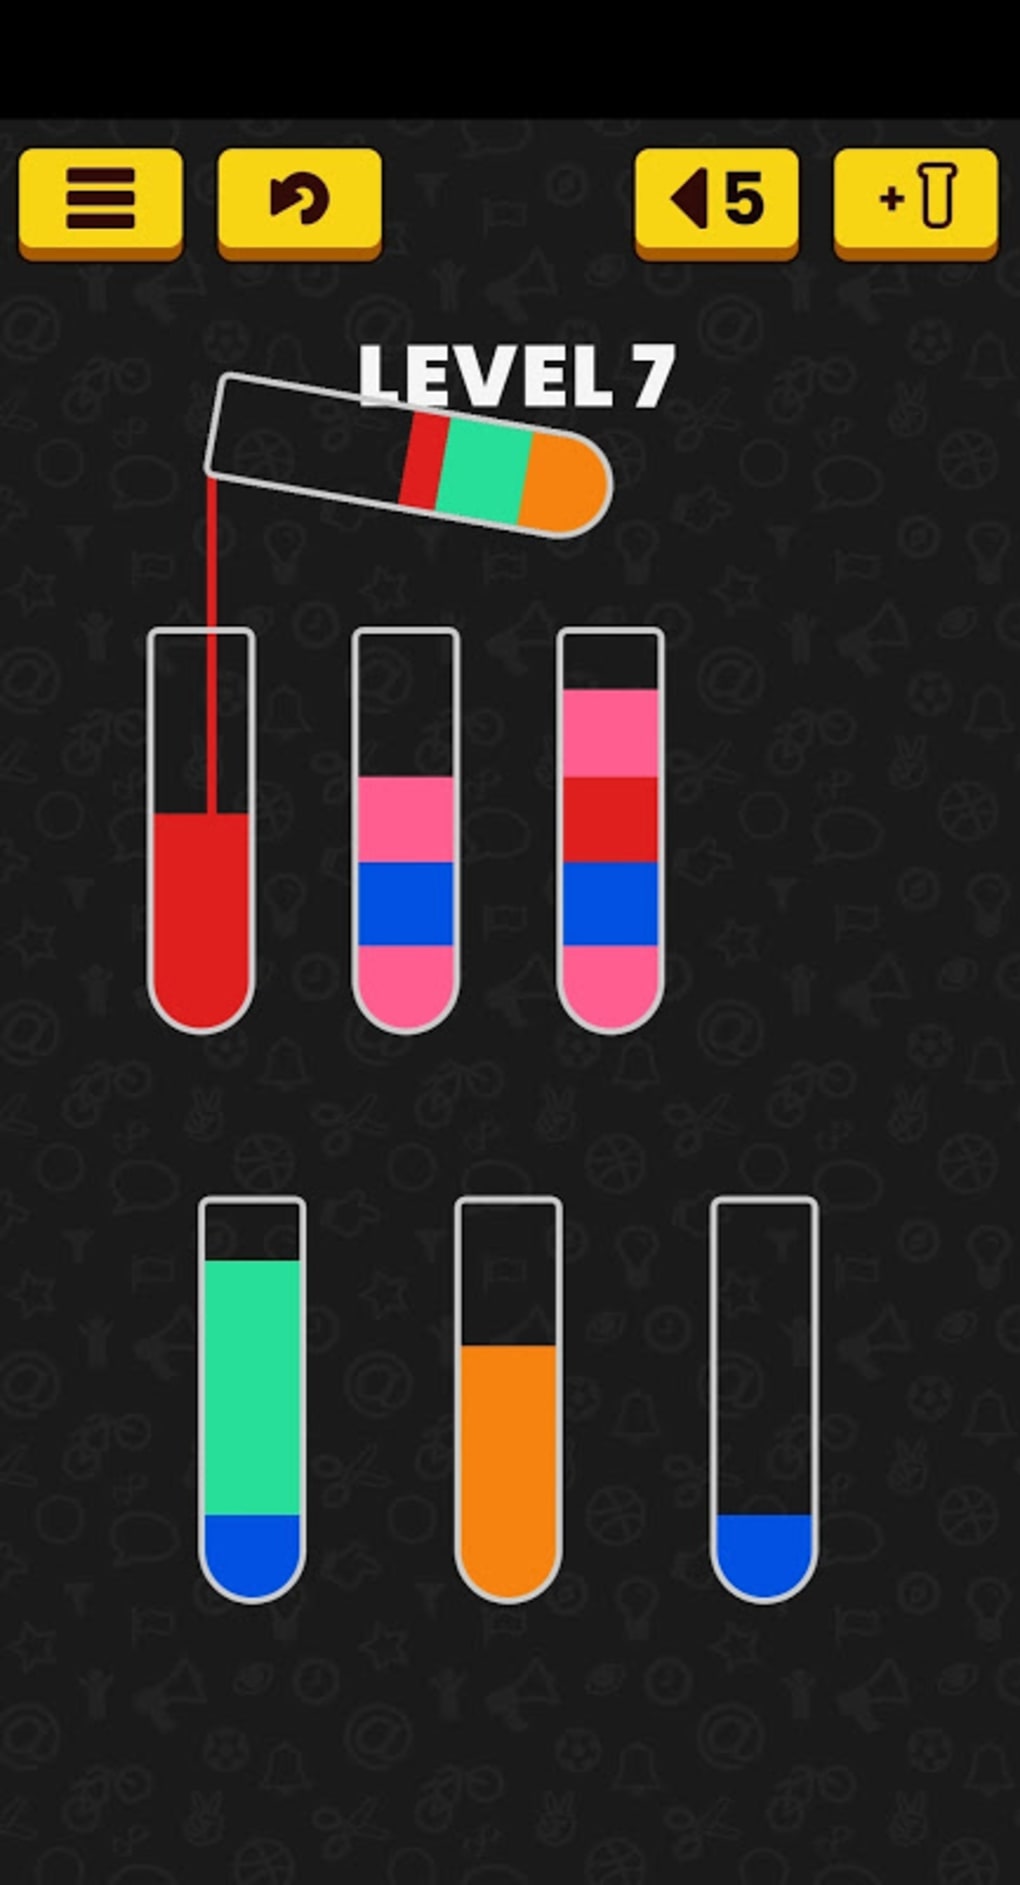 Water Sort Puzzle: Color Games – Applications sur Google Play